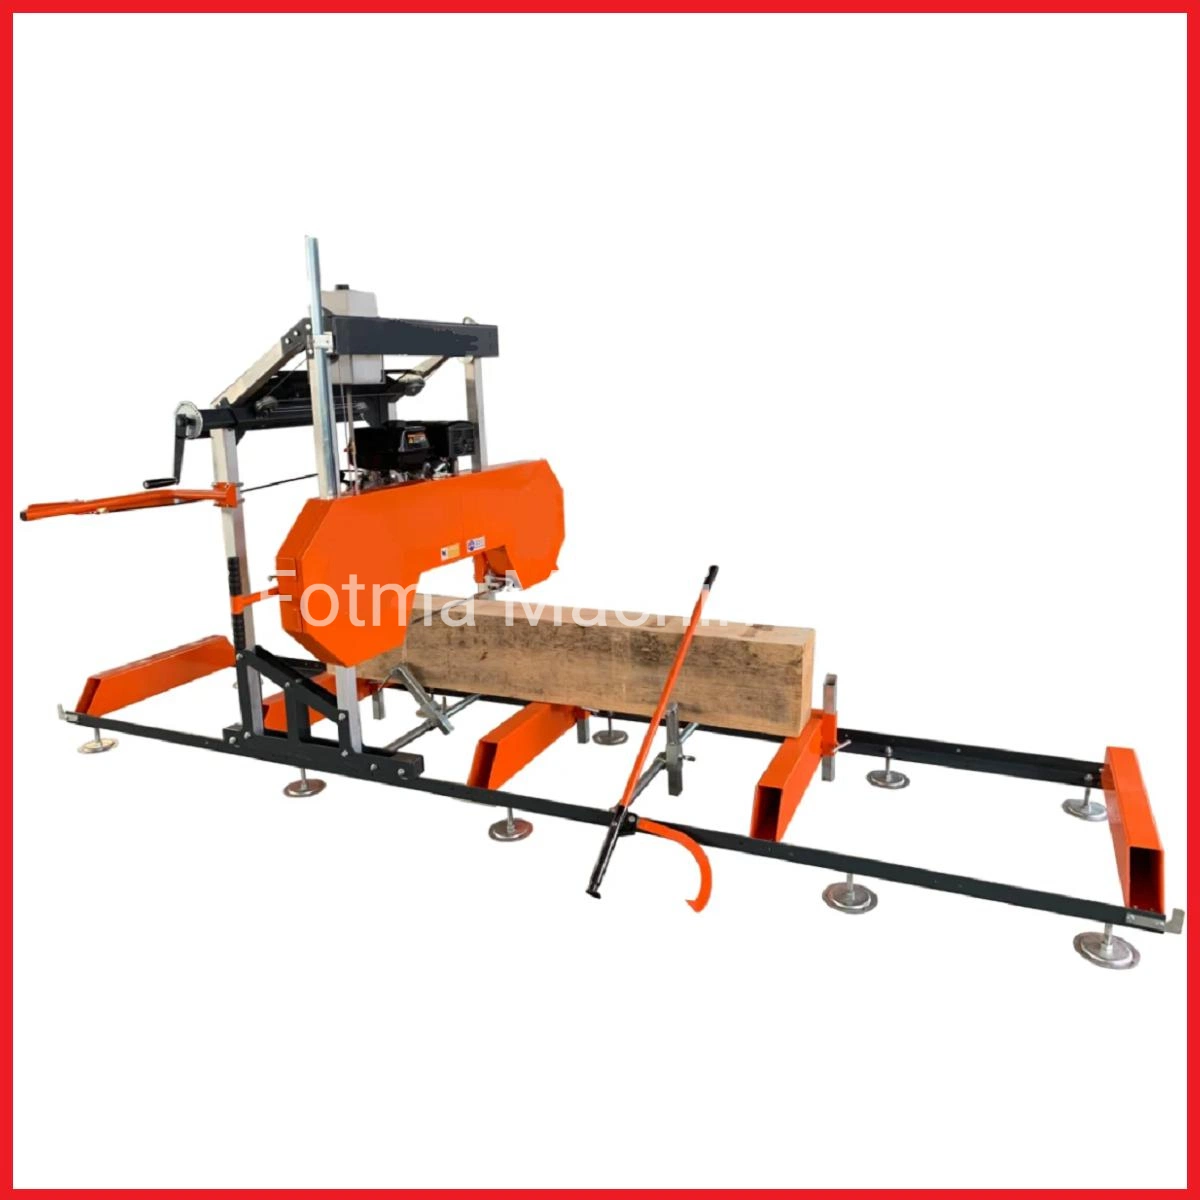 Horizontal Wood Bandsaw Saw Mill Portable Sawmill Woodworking Machinery with Trailer